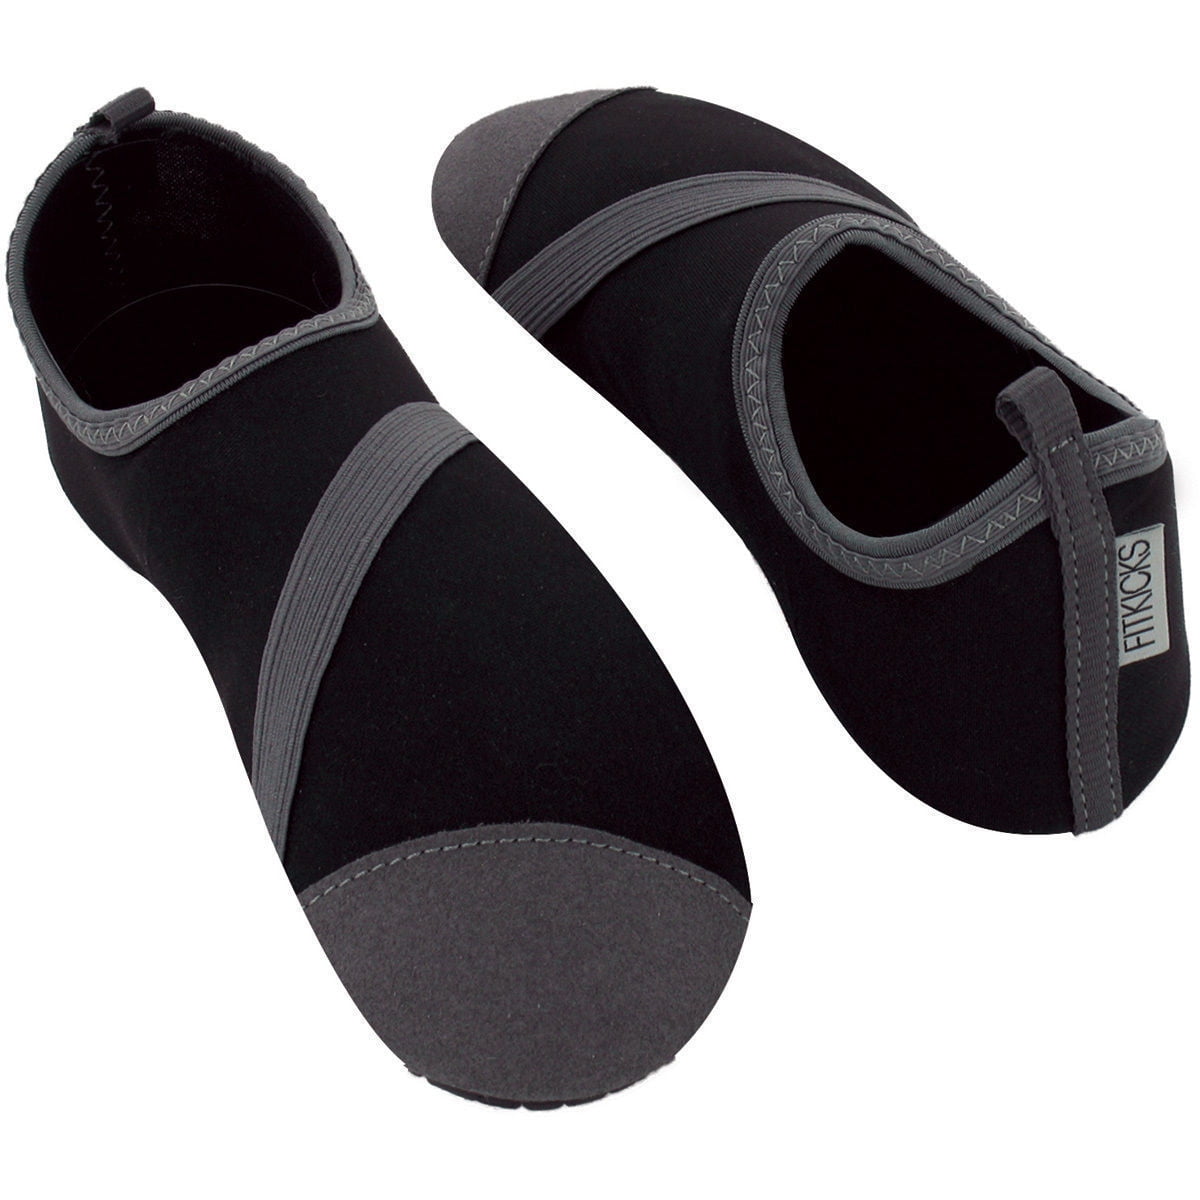 fitkicks slippers